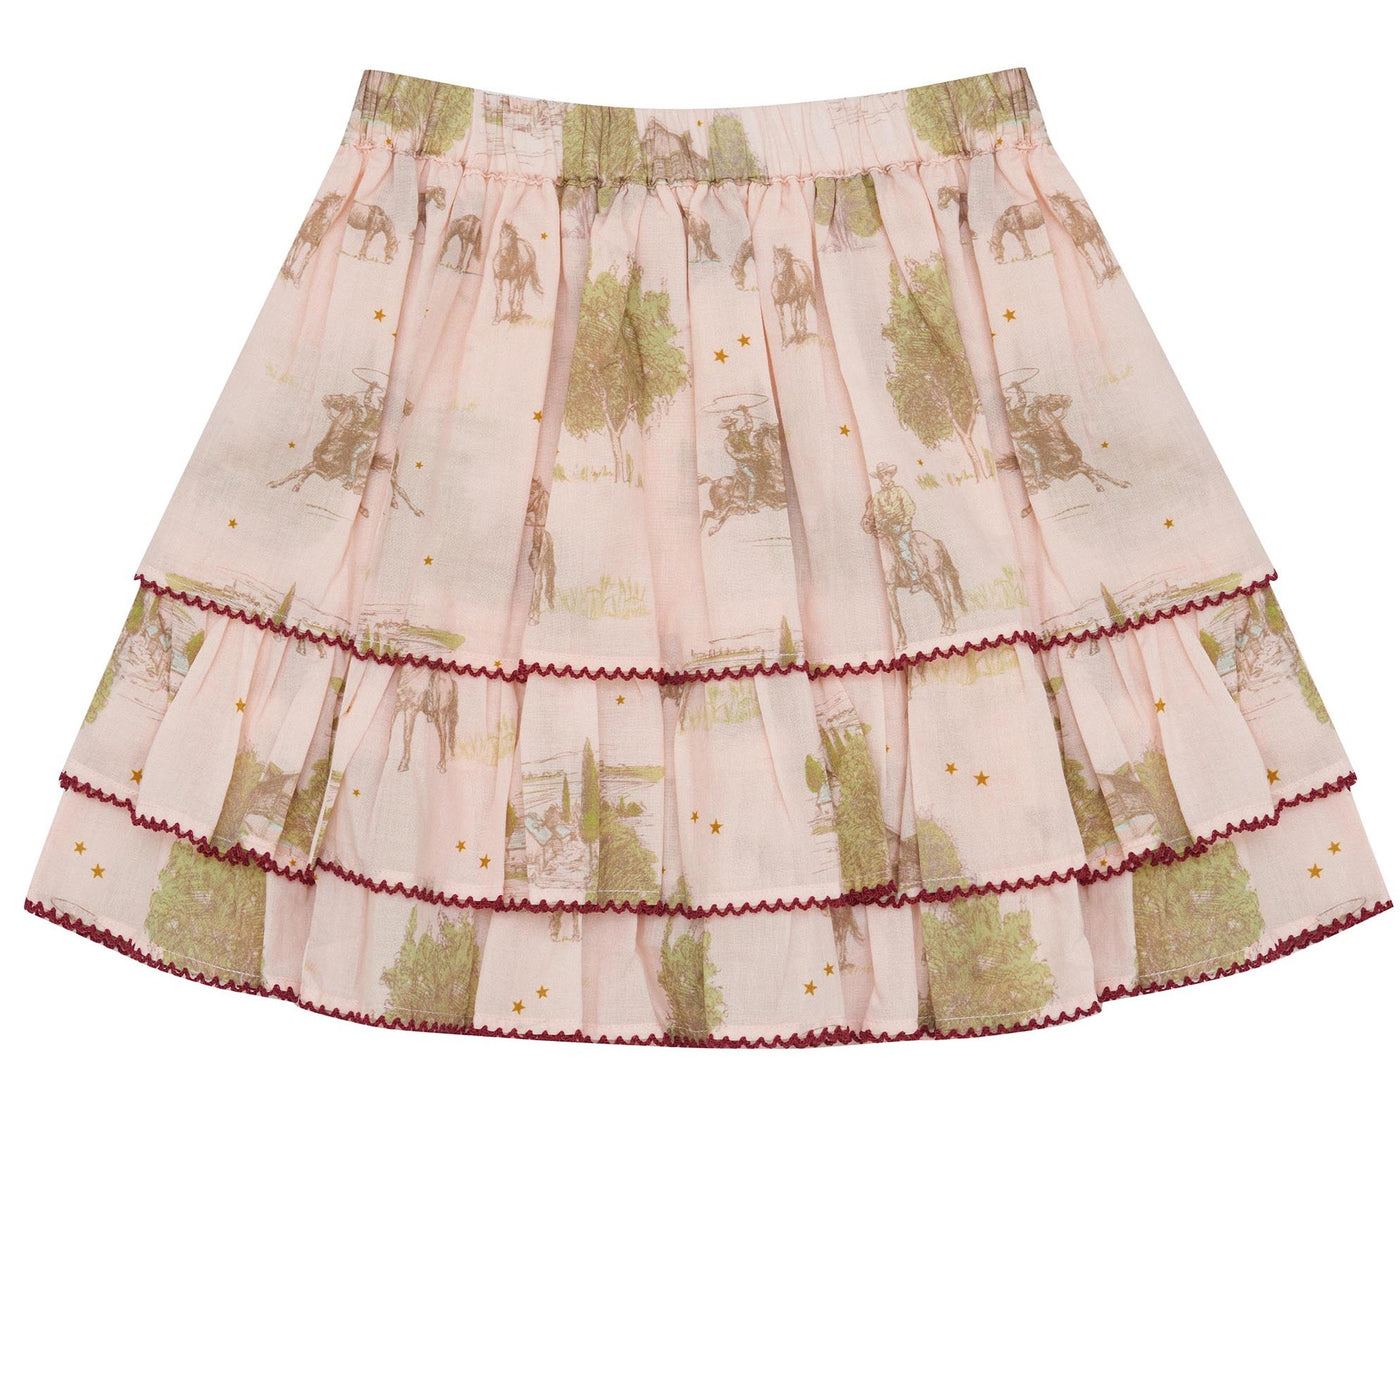 Bella and Lace Ellie-Mae Skirt Lone Star